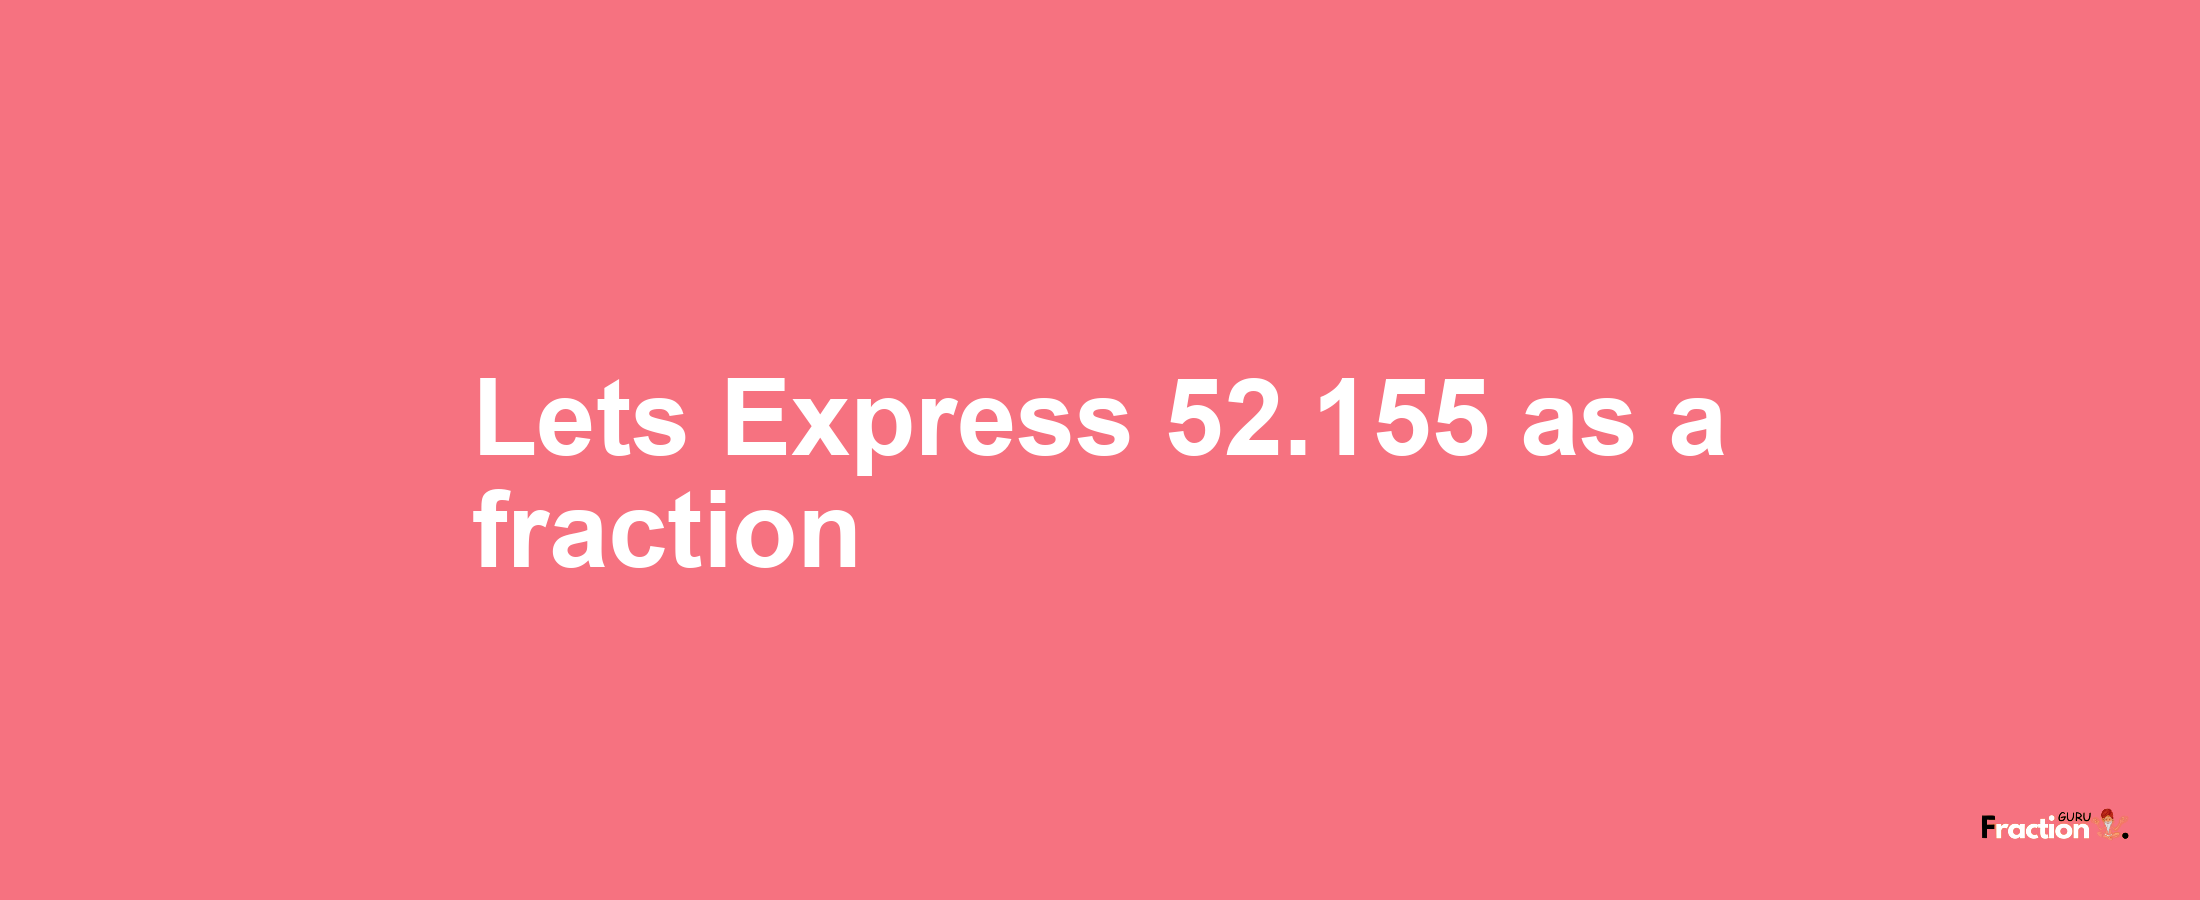 Lets Express 52.155 as afraction